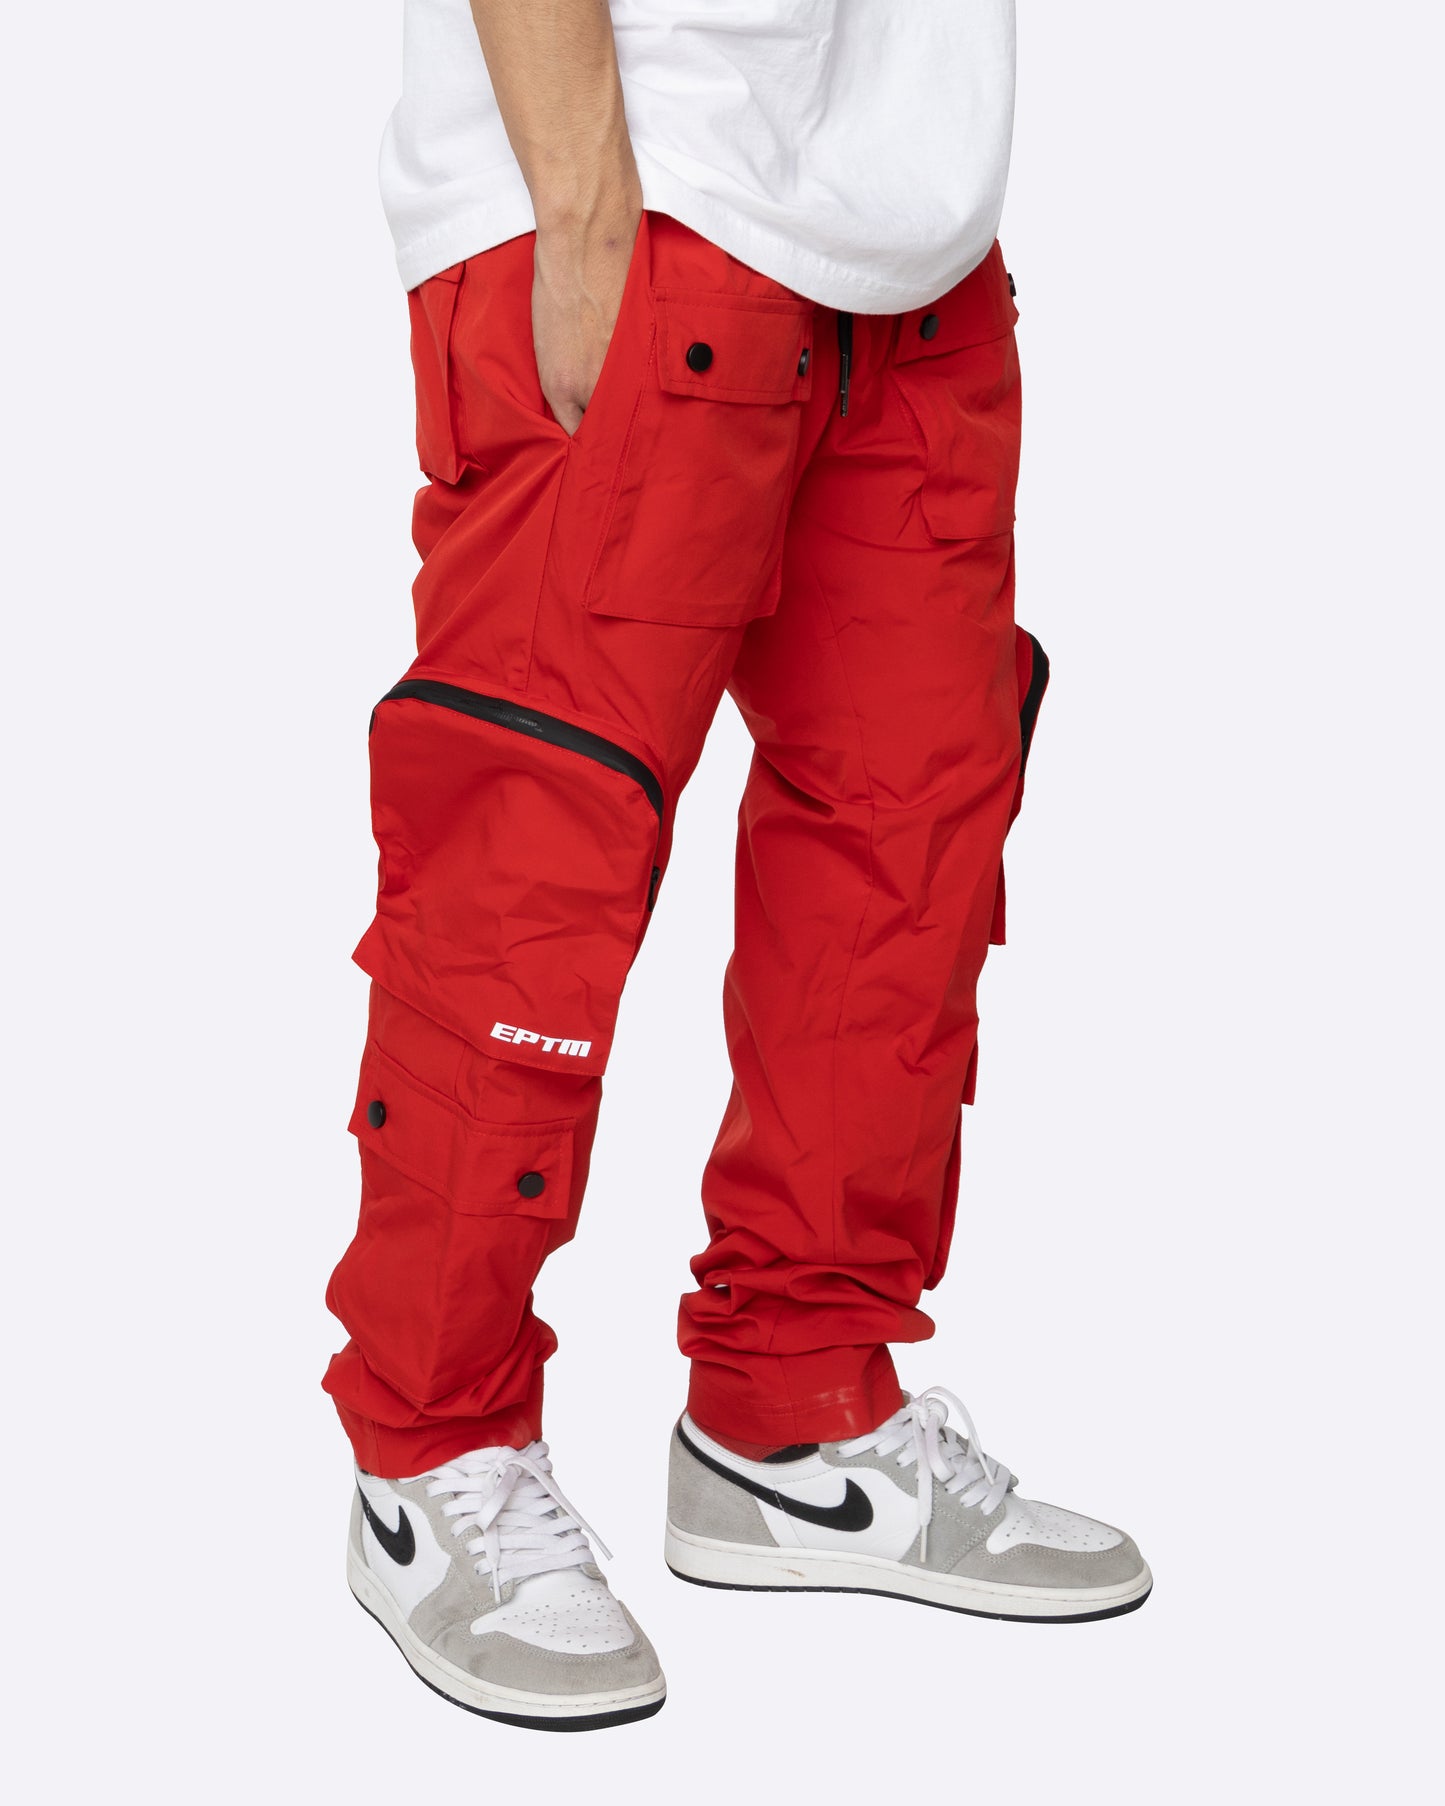 DAVE EAST "DOPE BOY" CARGO PANTS- RED